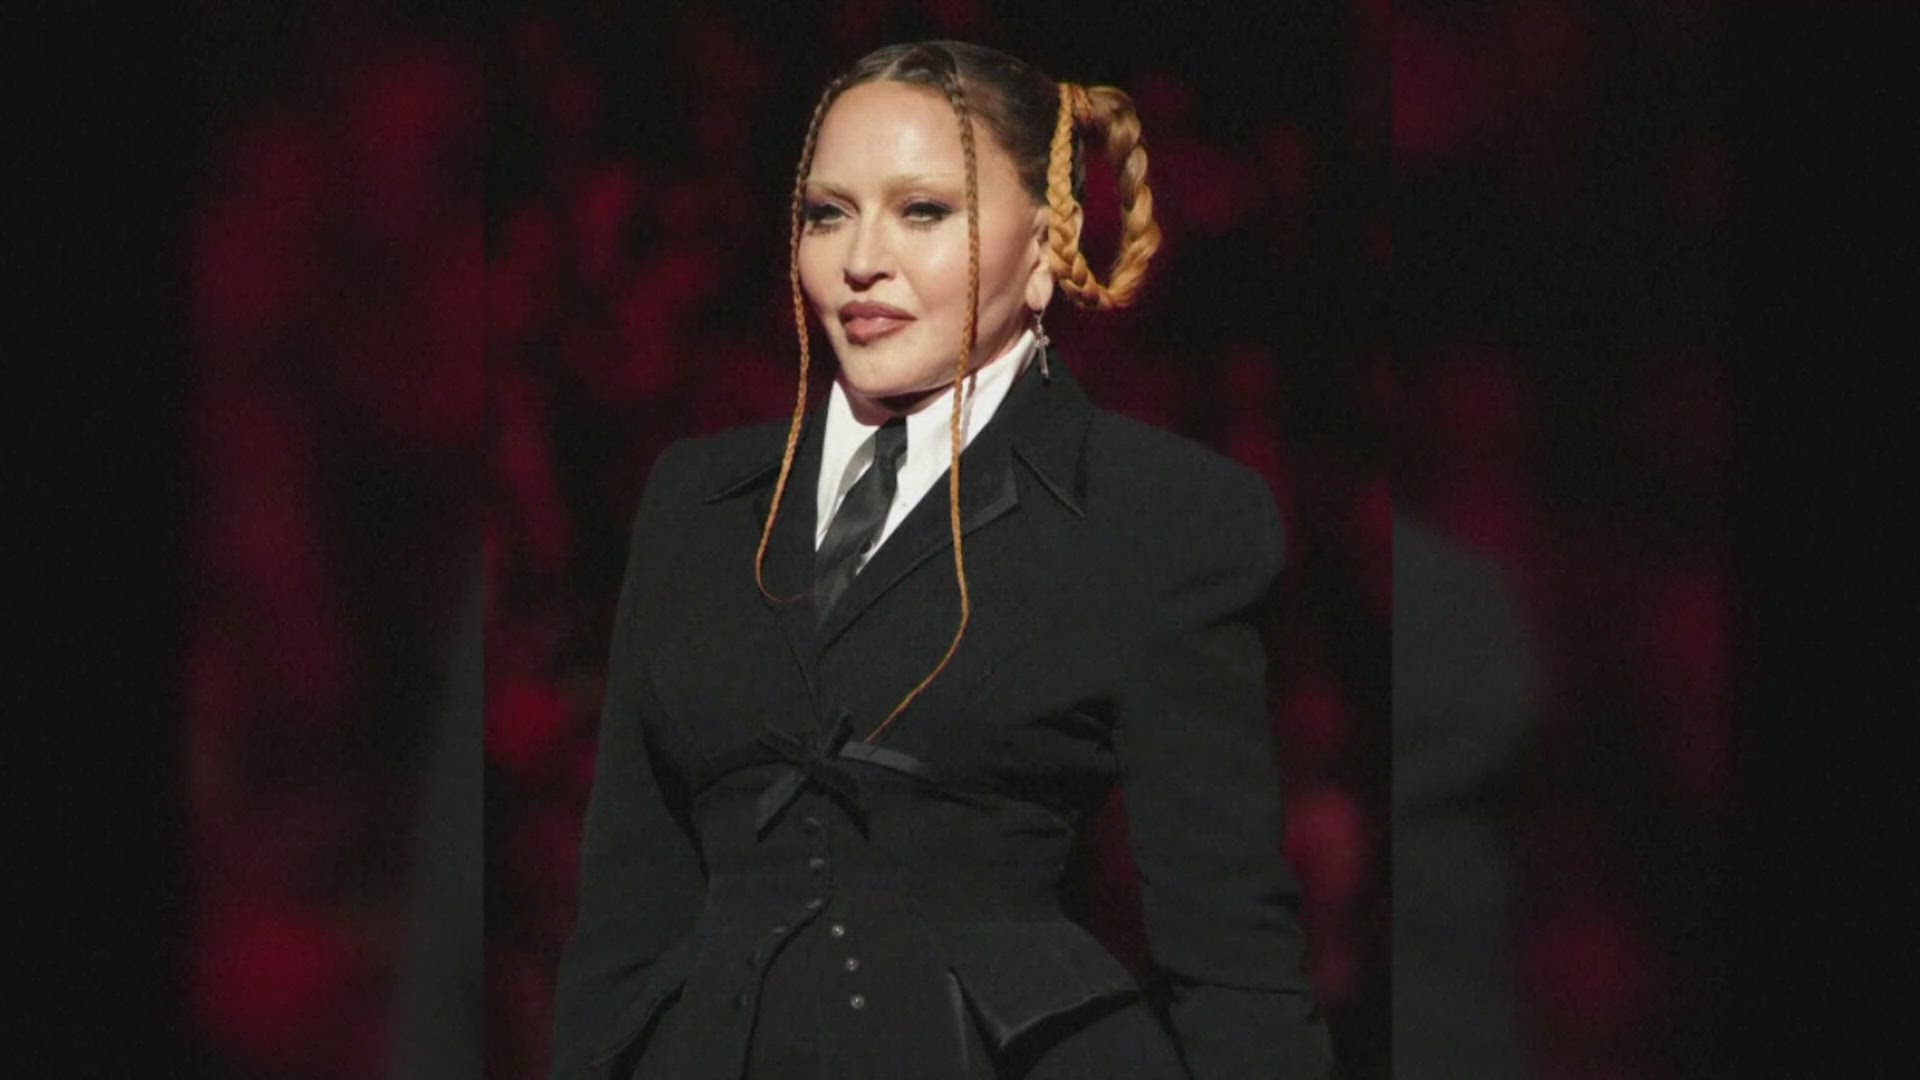 Madonna is recovering after a "serious bacterial infection" landed her in the hospital, according to an Instagram post from her manager Guy Oseary.